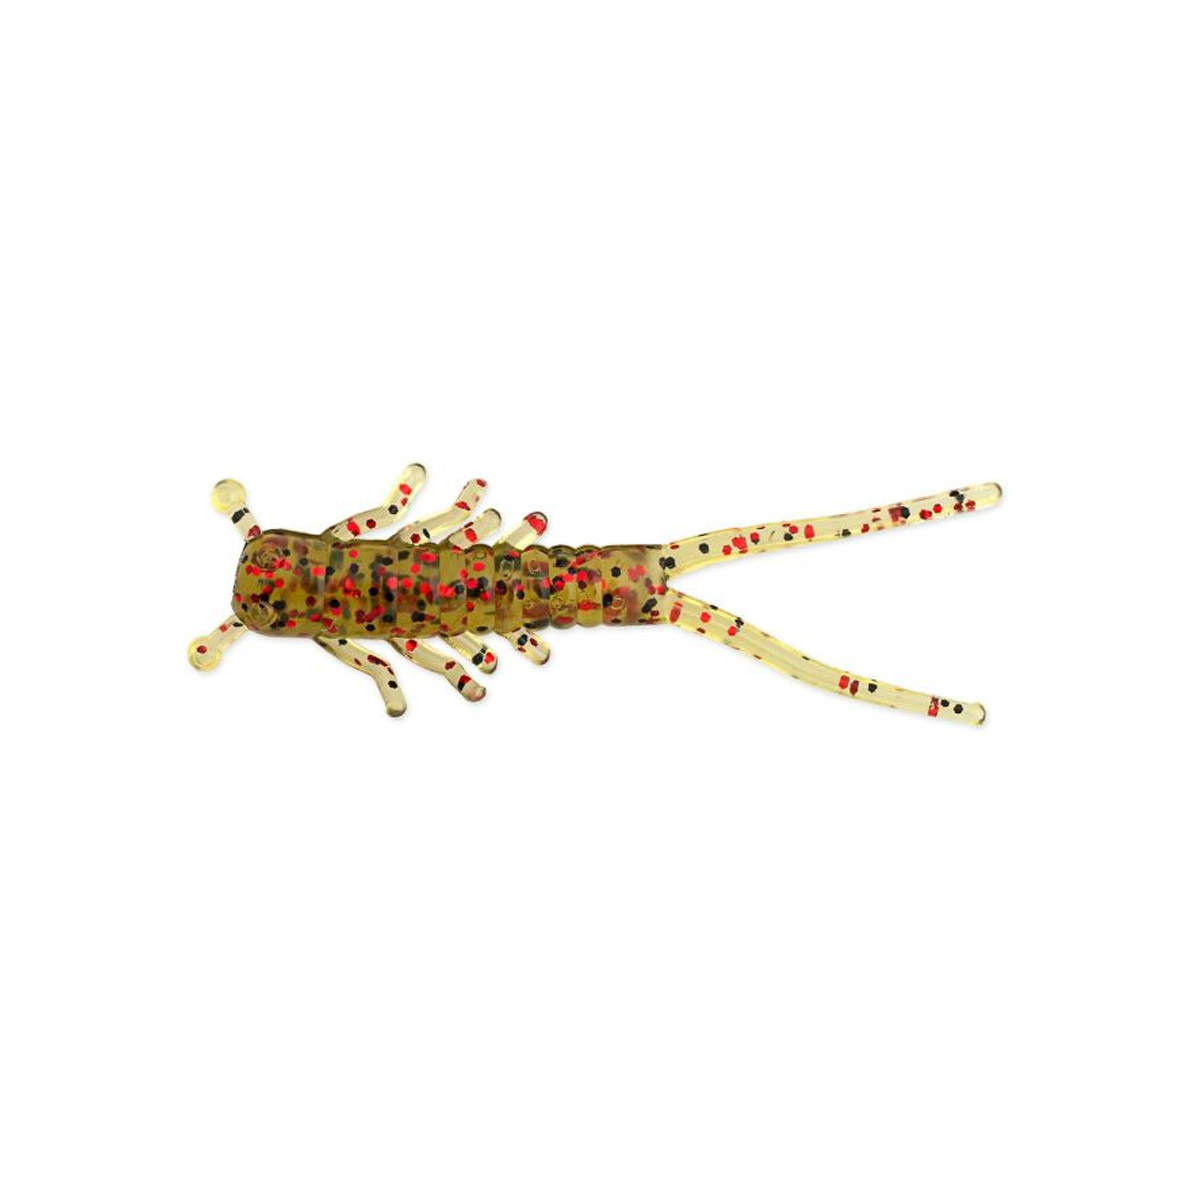 Lunker City Hellgies 1,5 Inch  -  Watermelon red flakes